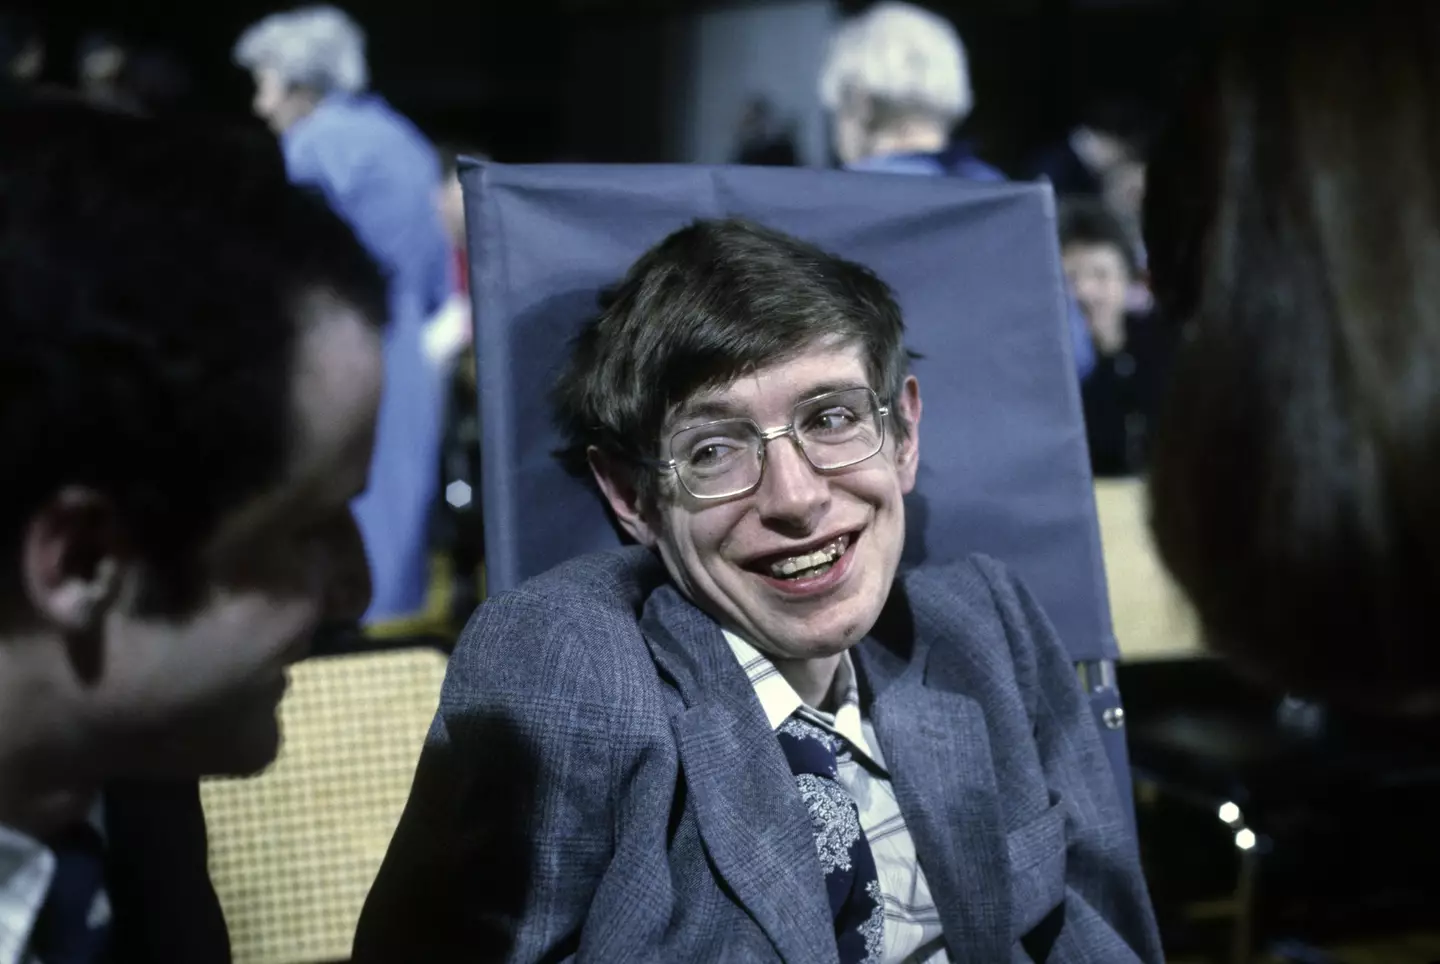 However, before using a synethizer, Hawking's ability to communicate was aided by interpreters. (Santi Visalli/ Getty Images) 